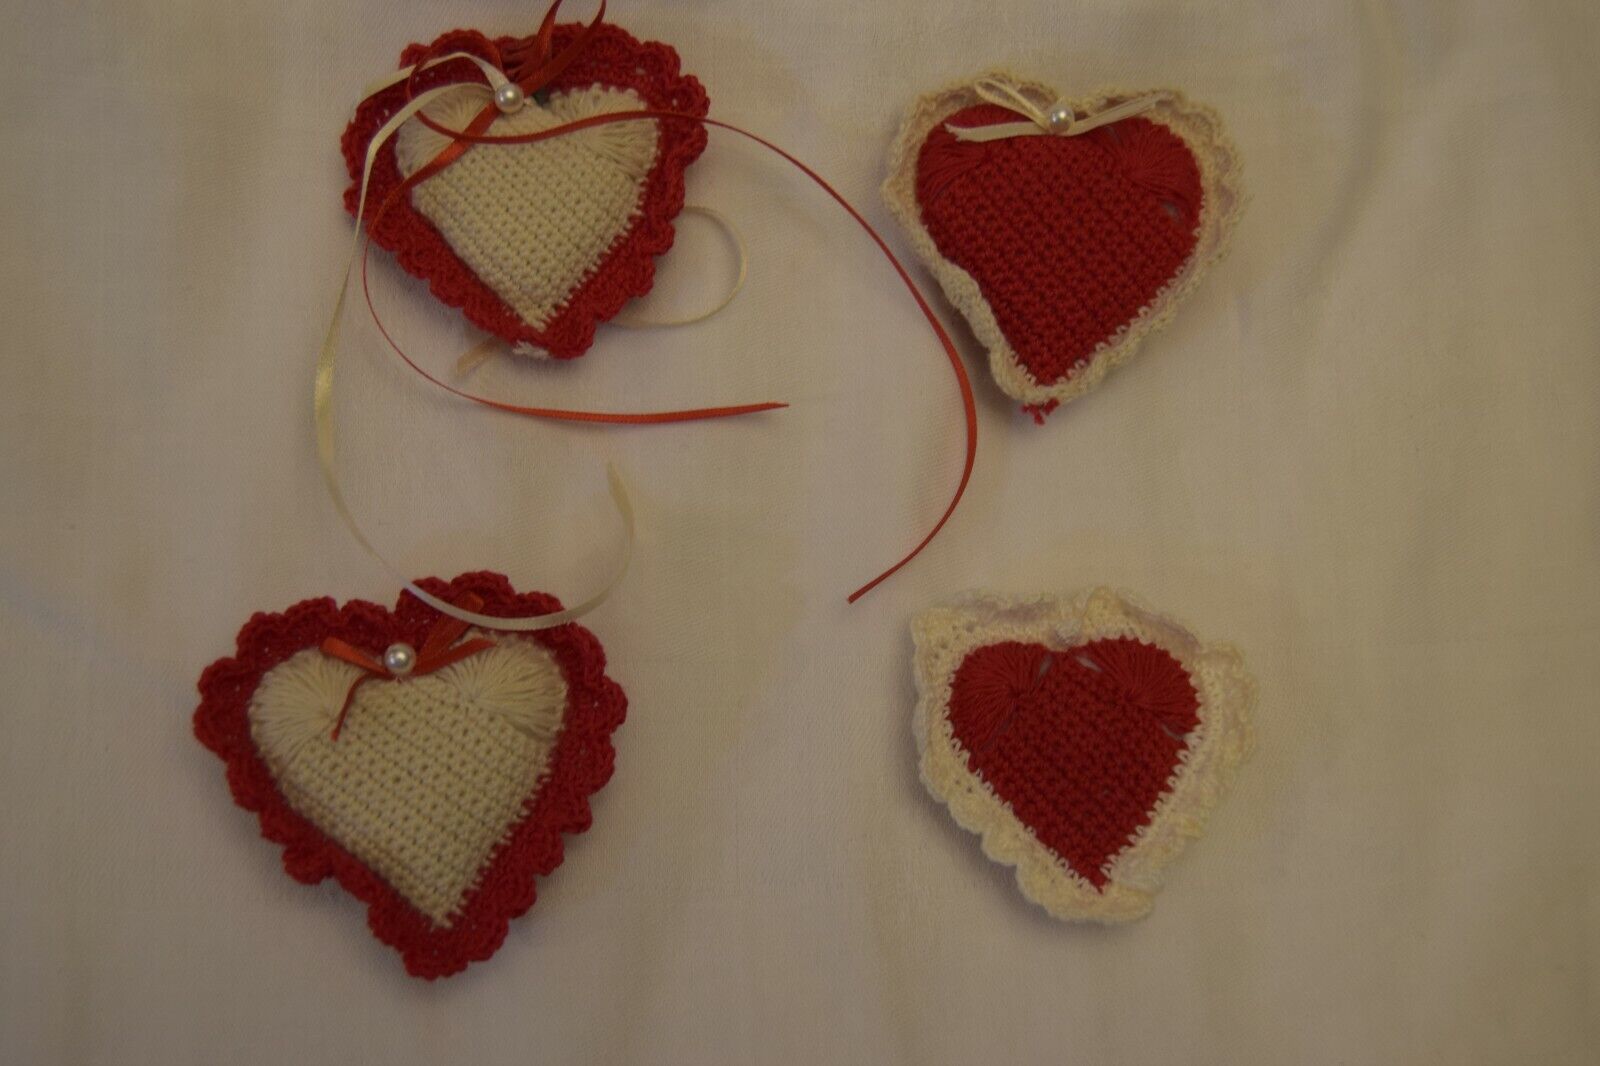 4 Red Crocheted Hearts